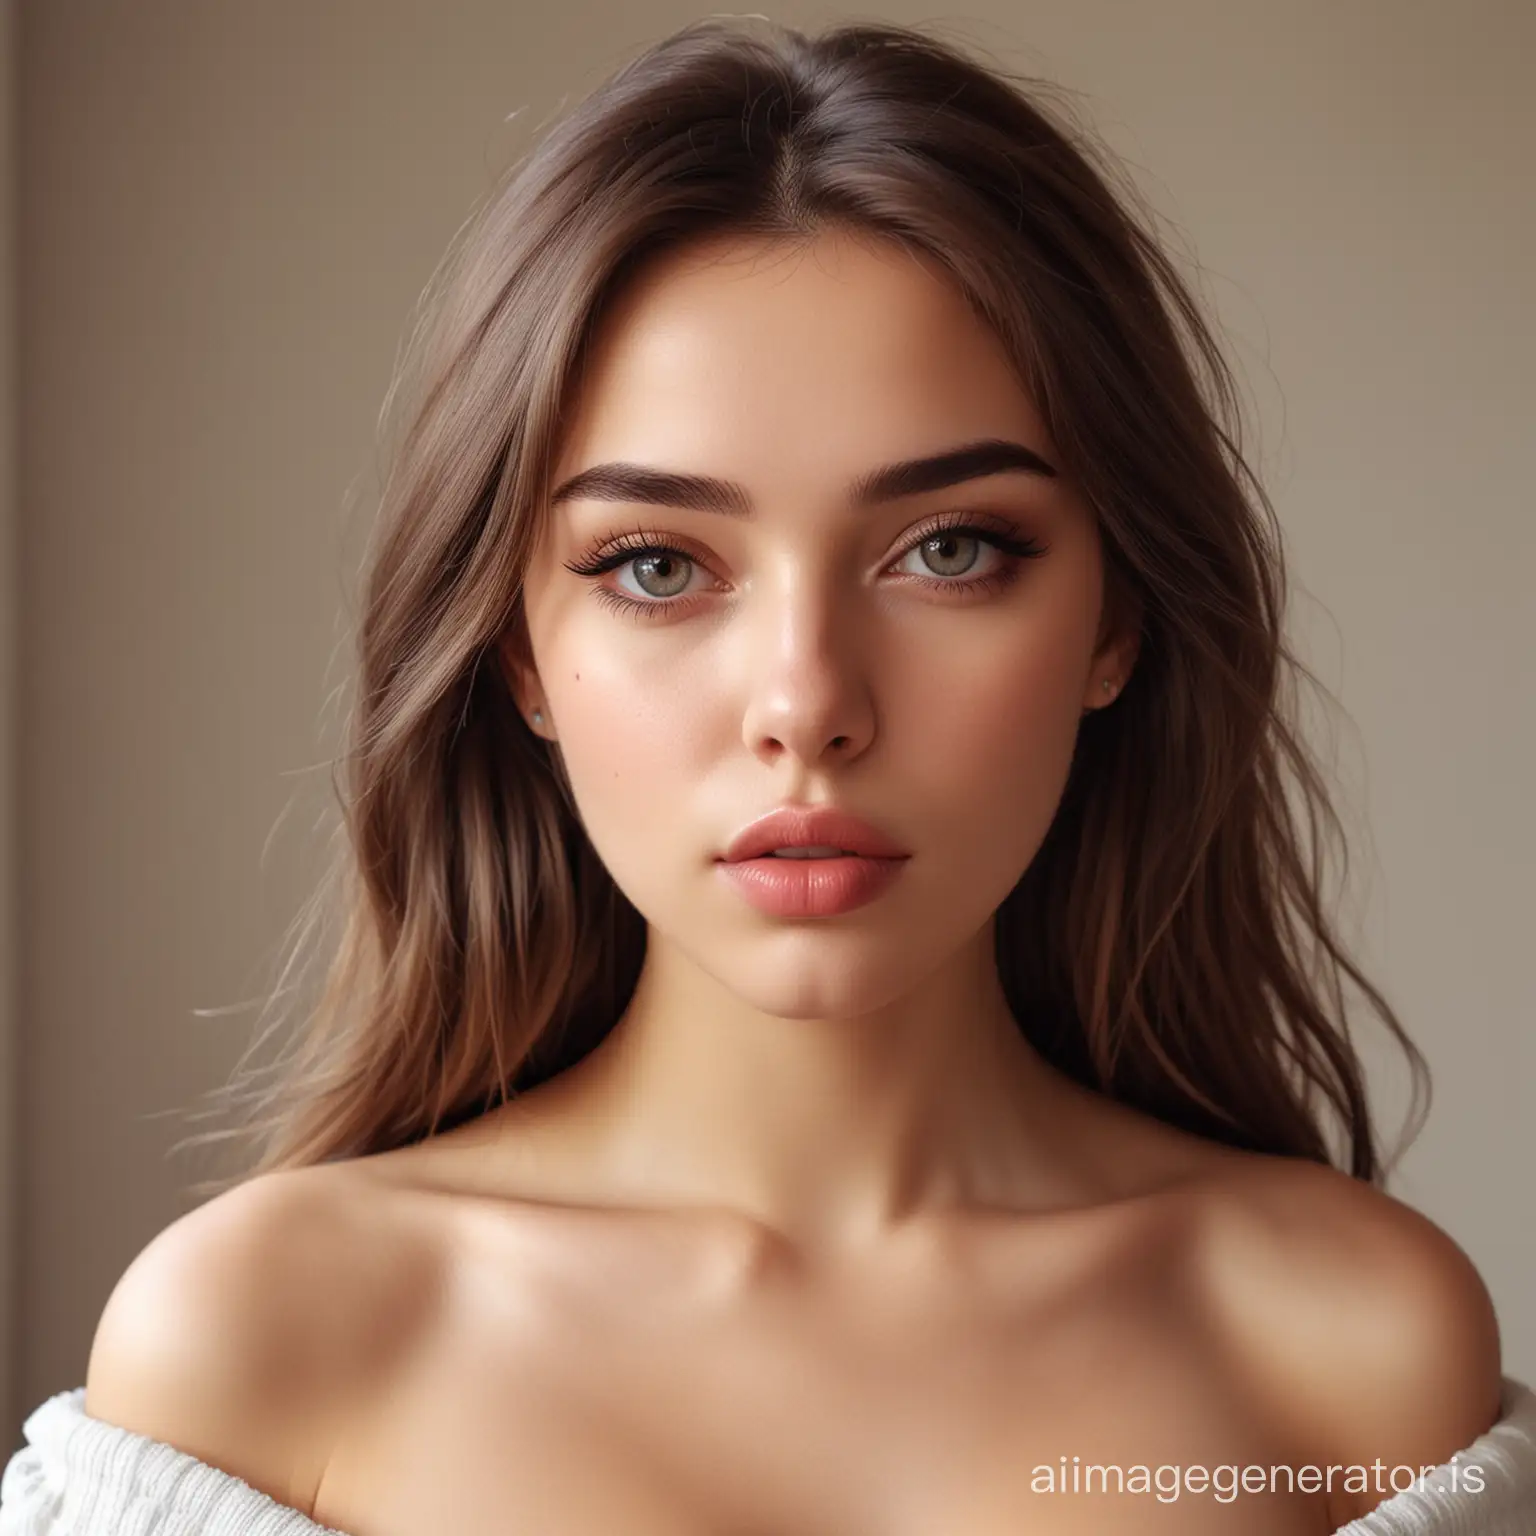 Girl of European appearance, 8K resolution picture, not cartoonish appearance, real person, Instagram, model, Straight eyes, puffy lips, chest